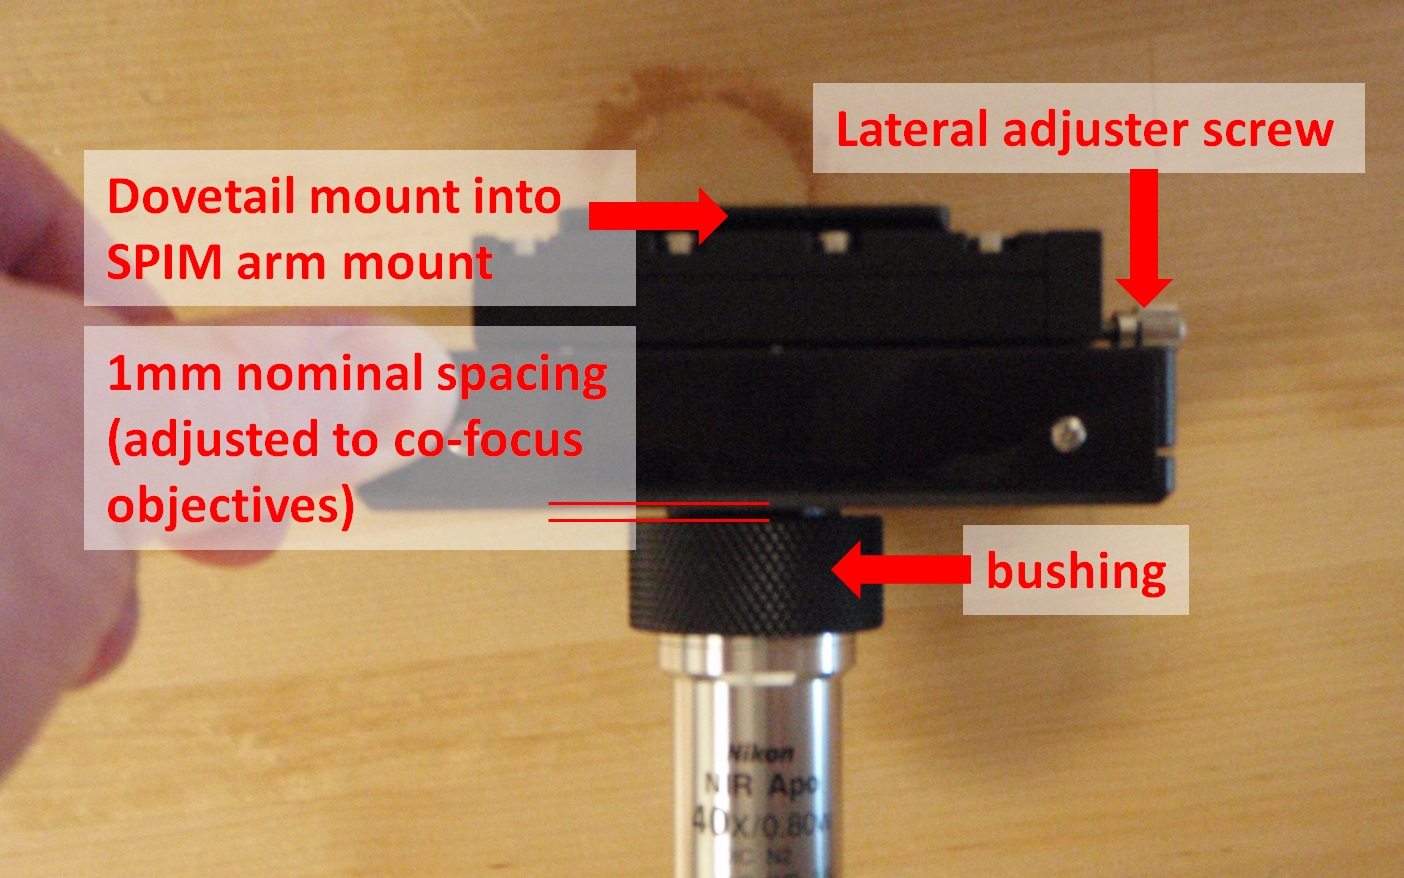  2015 piezo objective mover with lateral adjuster.